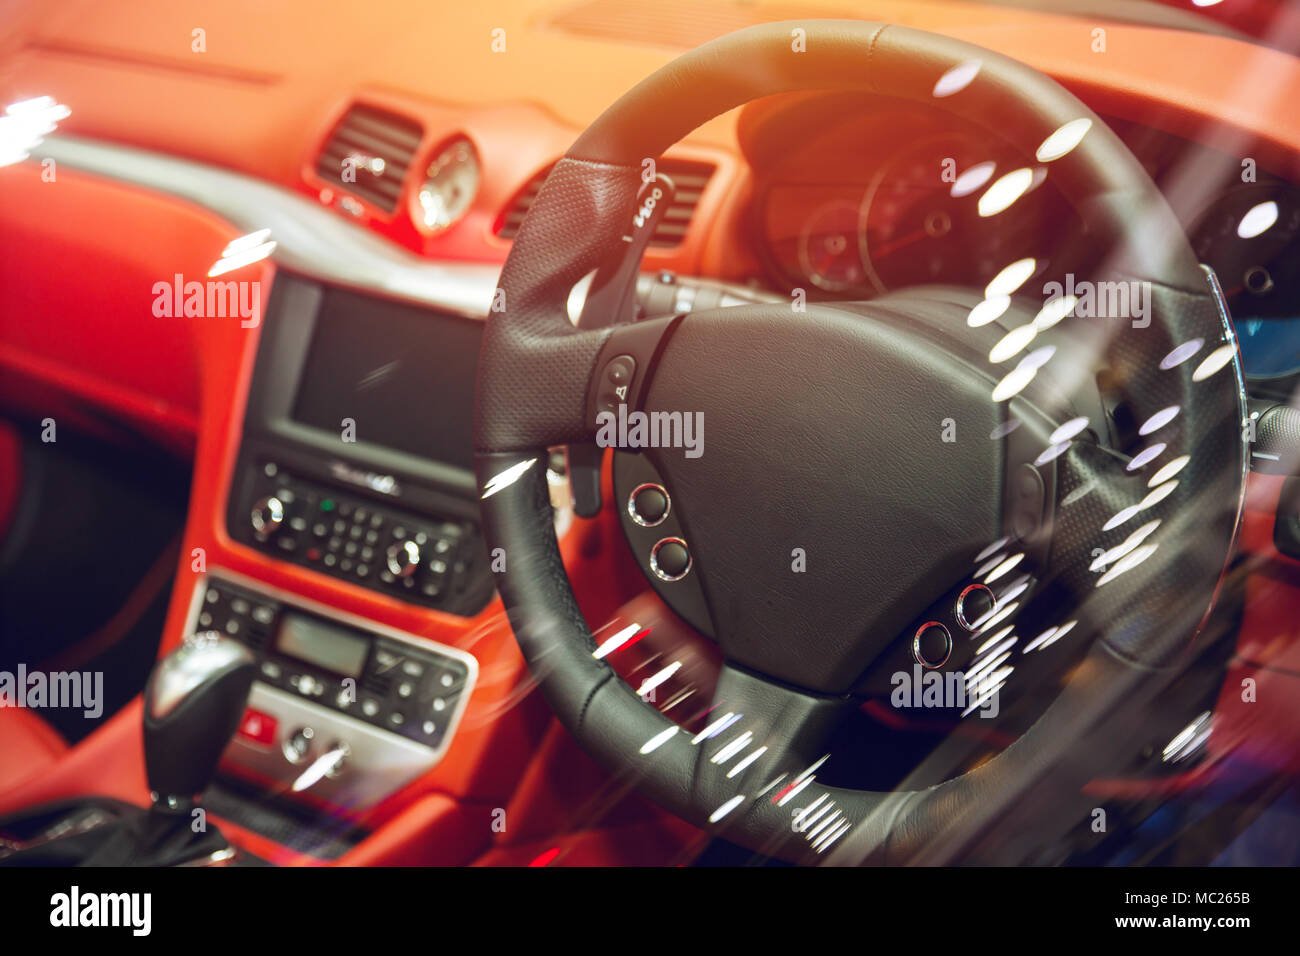 Luxury vehicle interior car dashboard with steering wheel made from leather Stock Photo